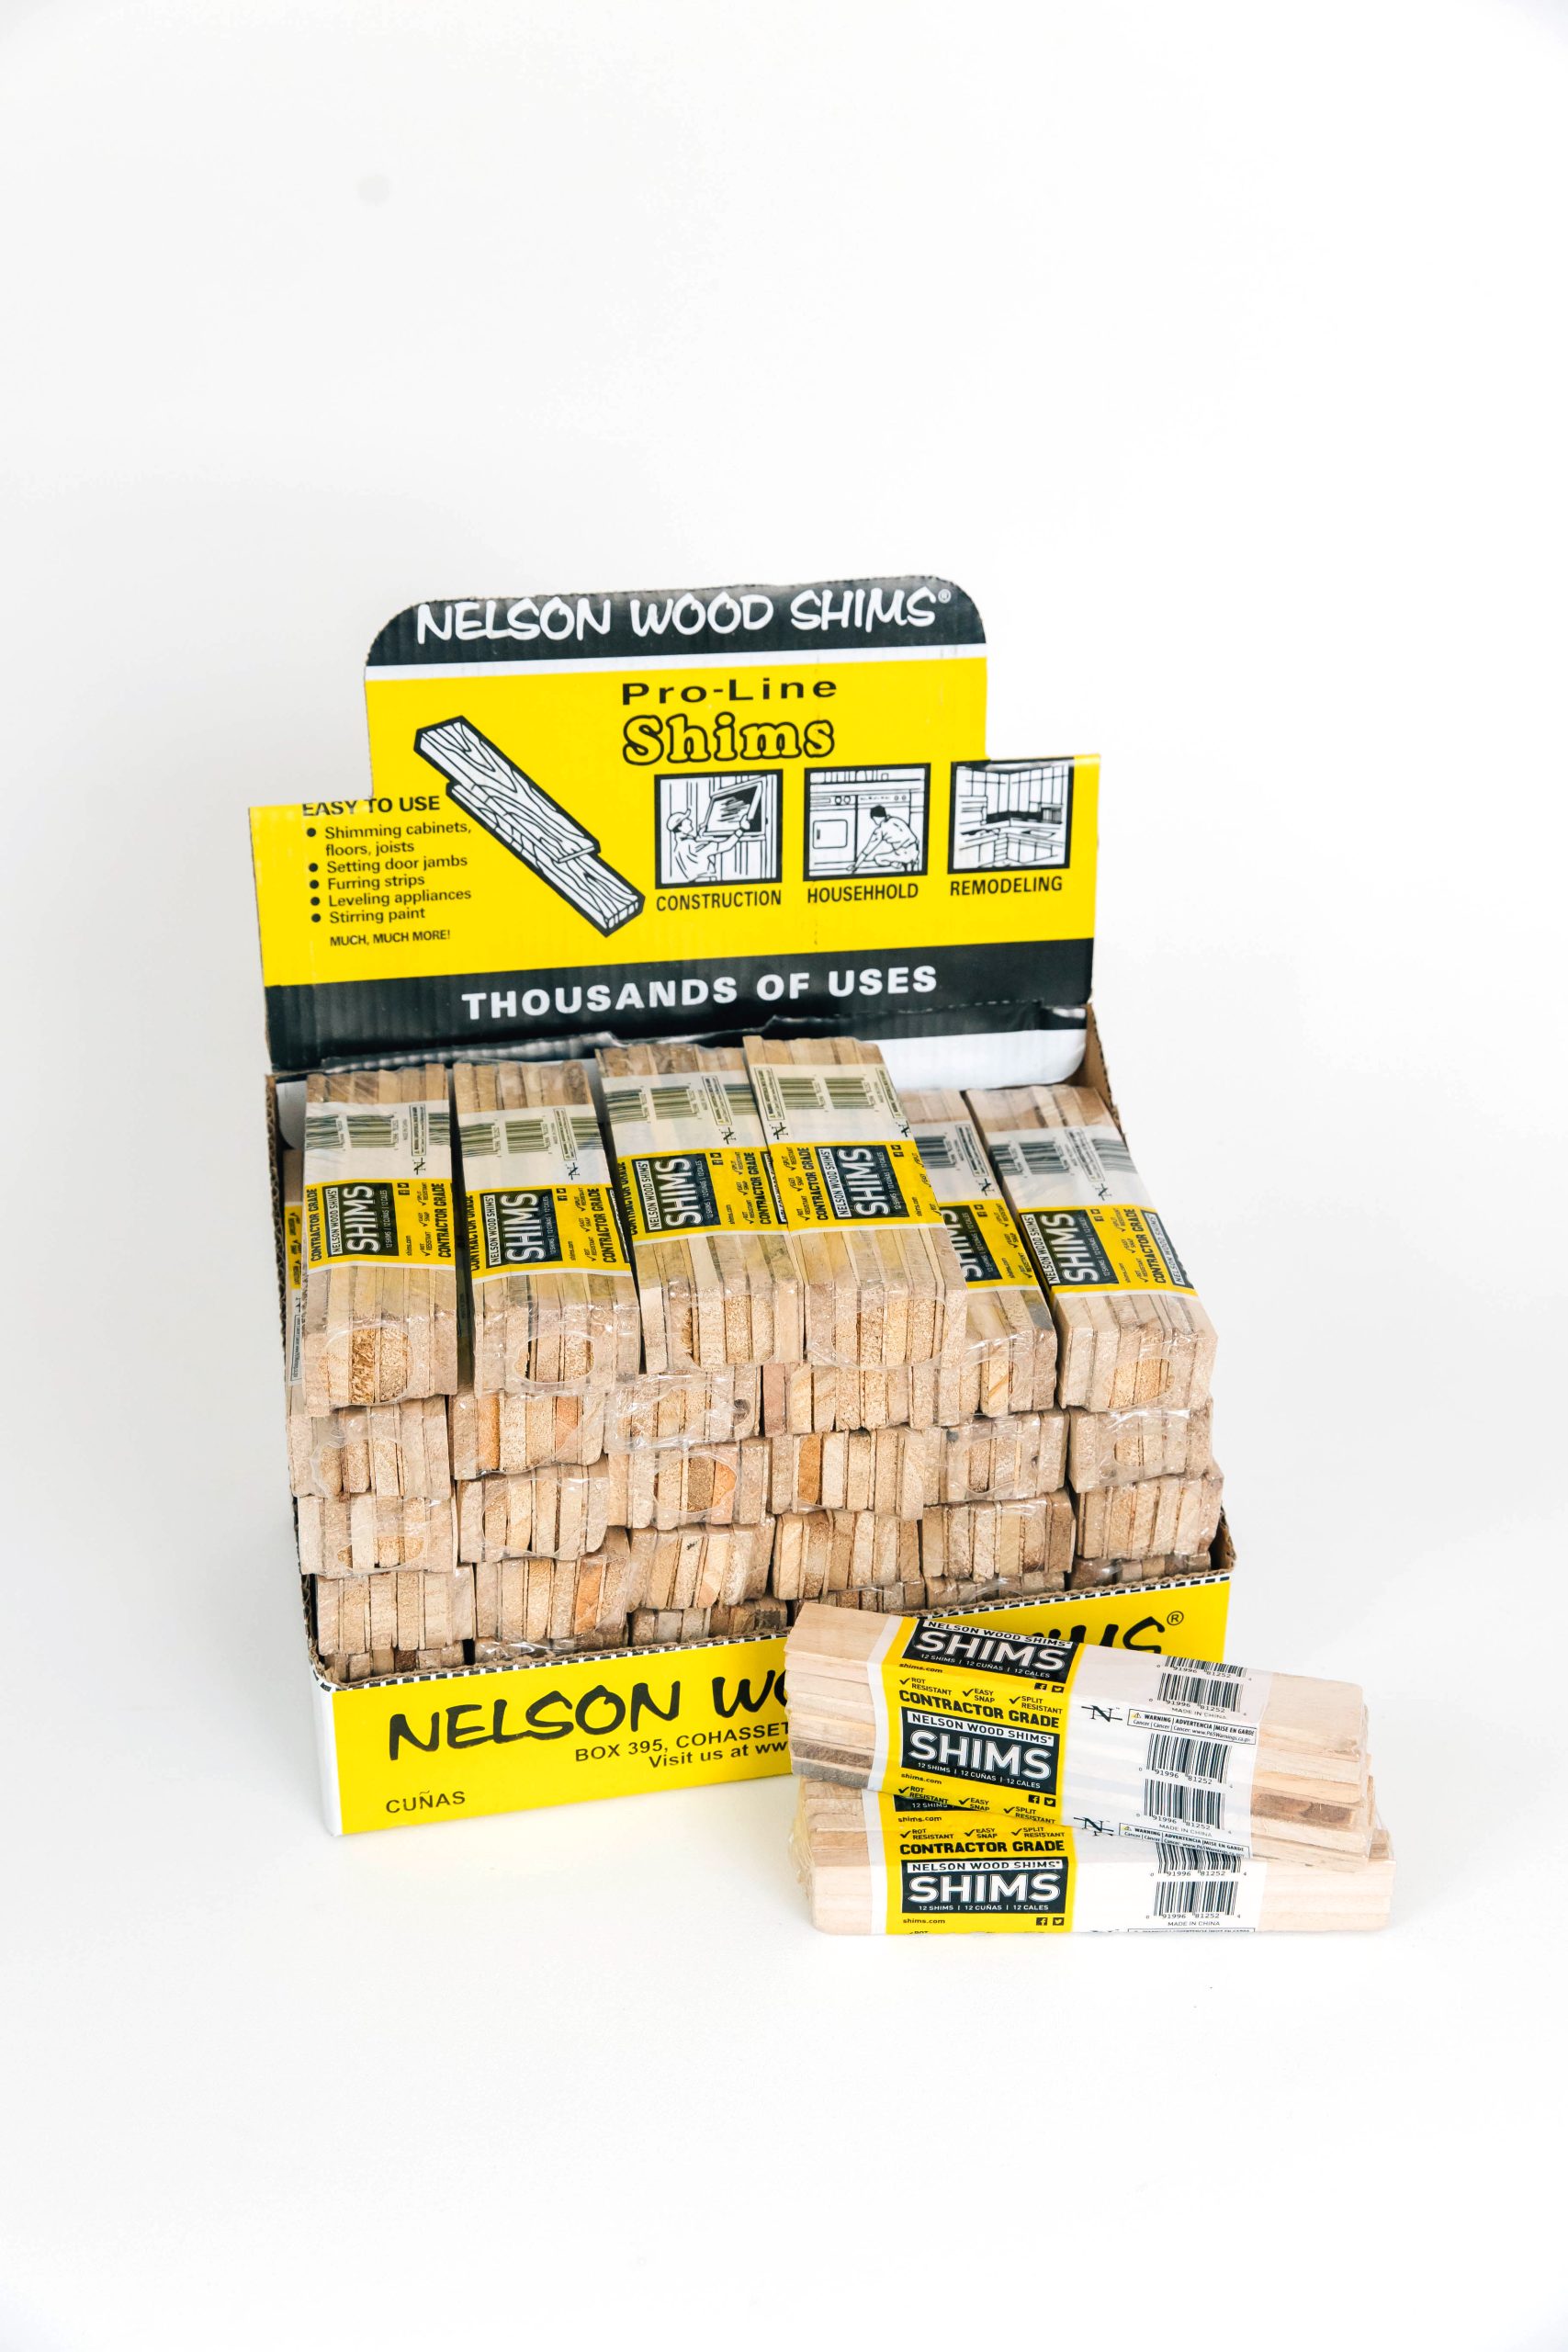 Nelson Wood Shims WC8/32/15/50-LA Composite Shims, 8 x 1-3/8-In